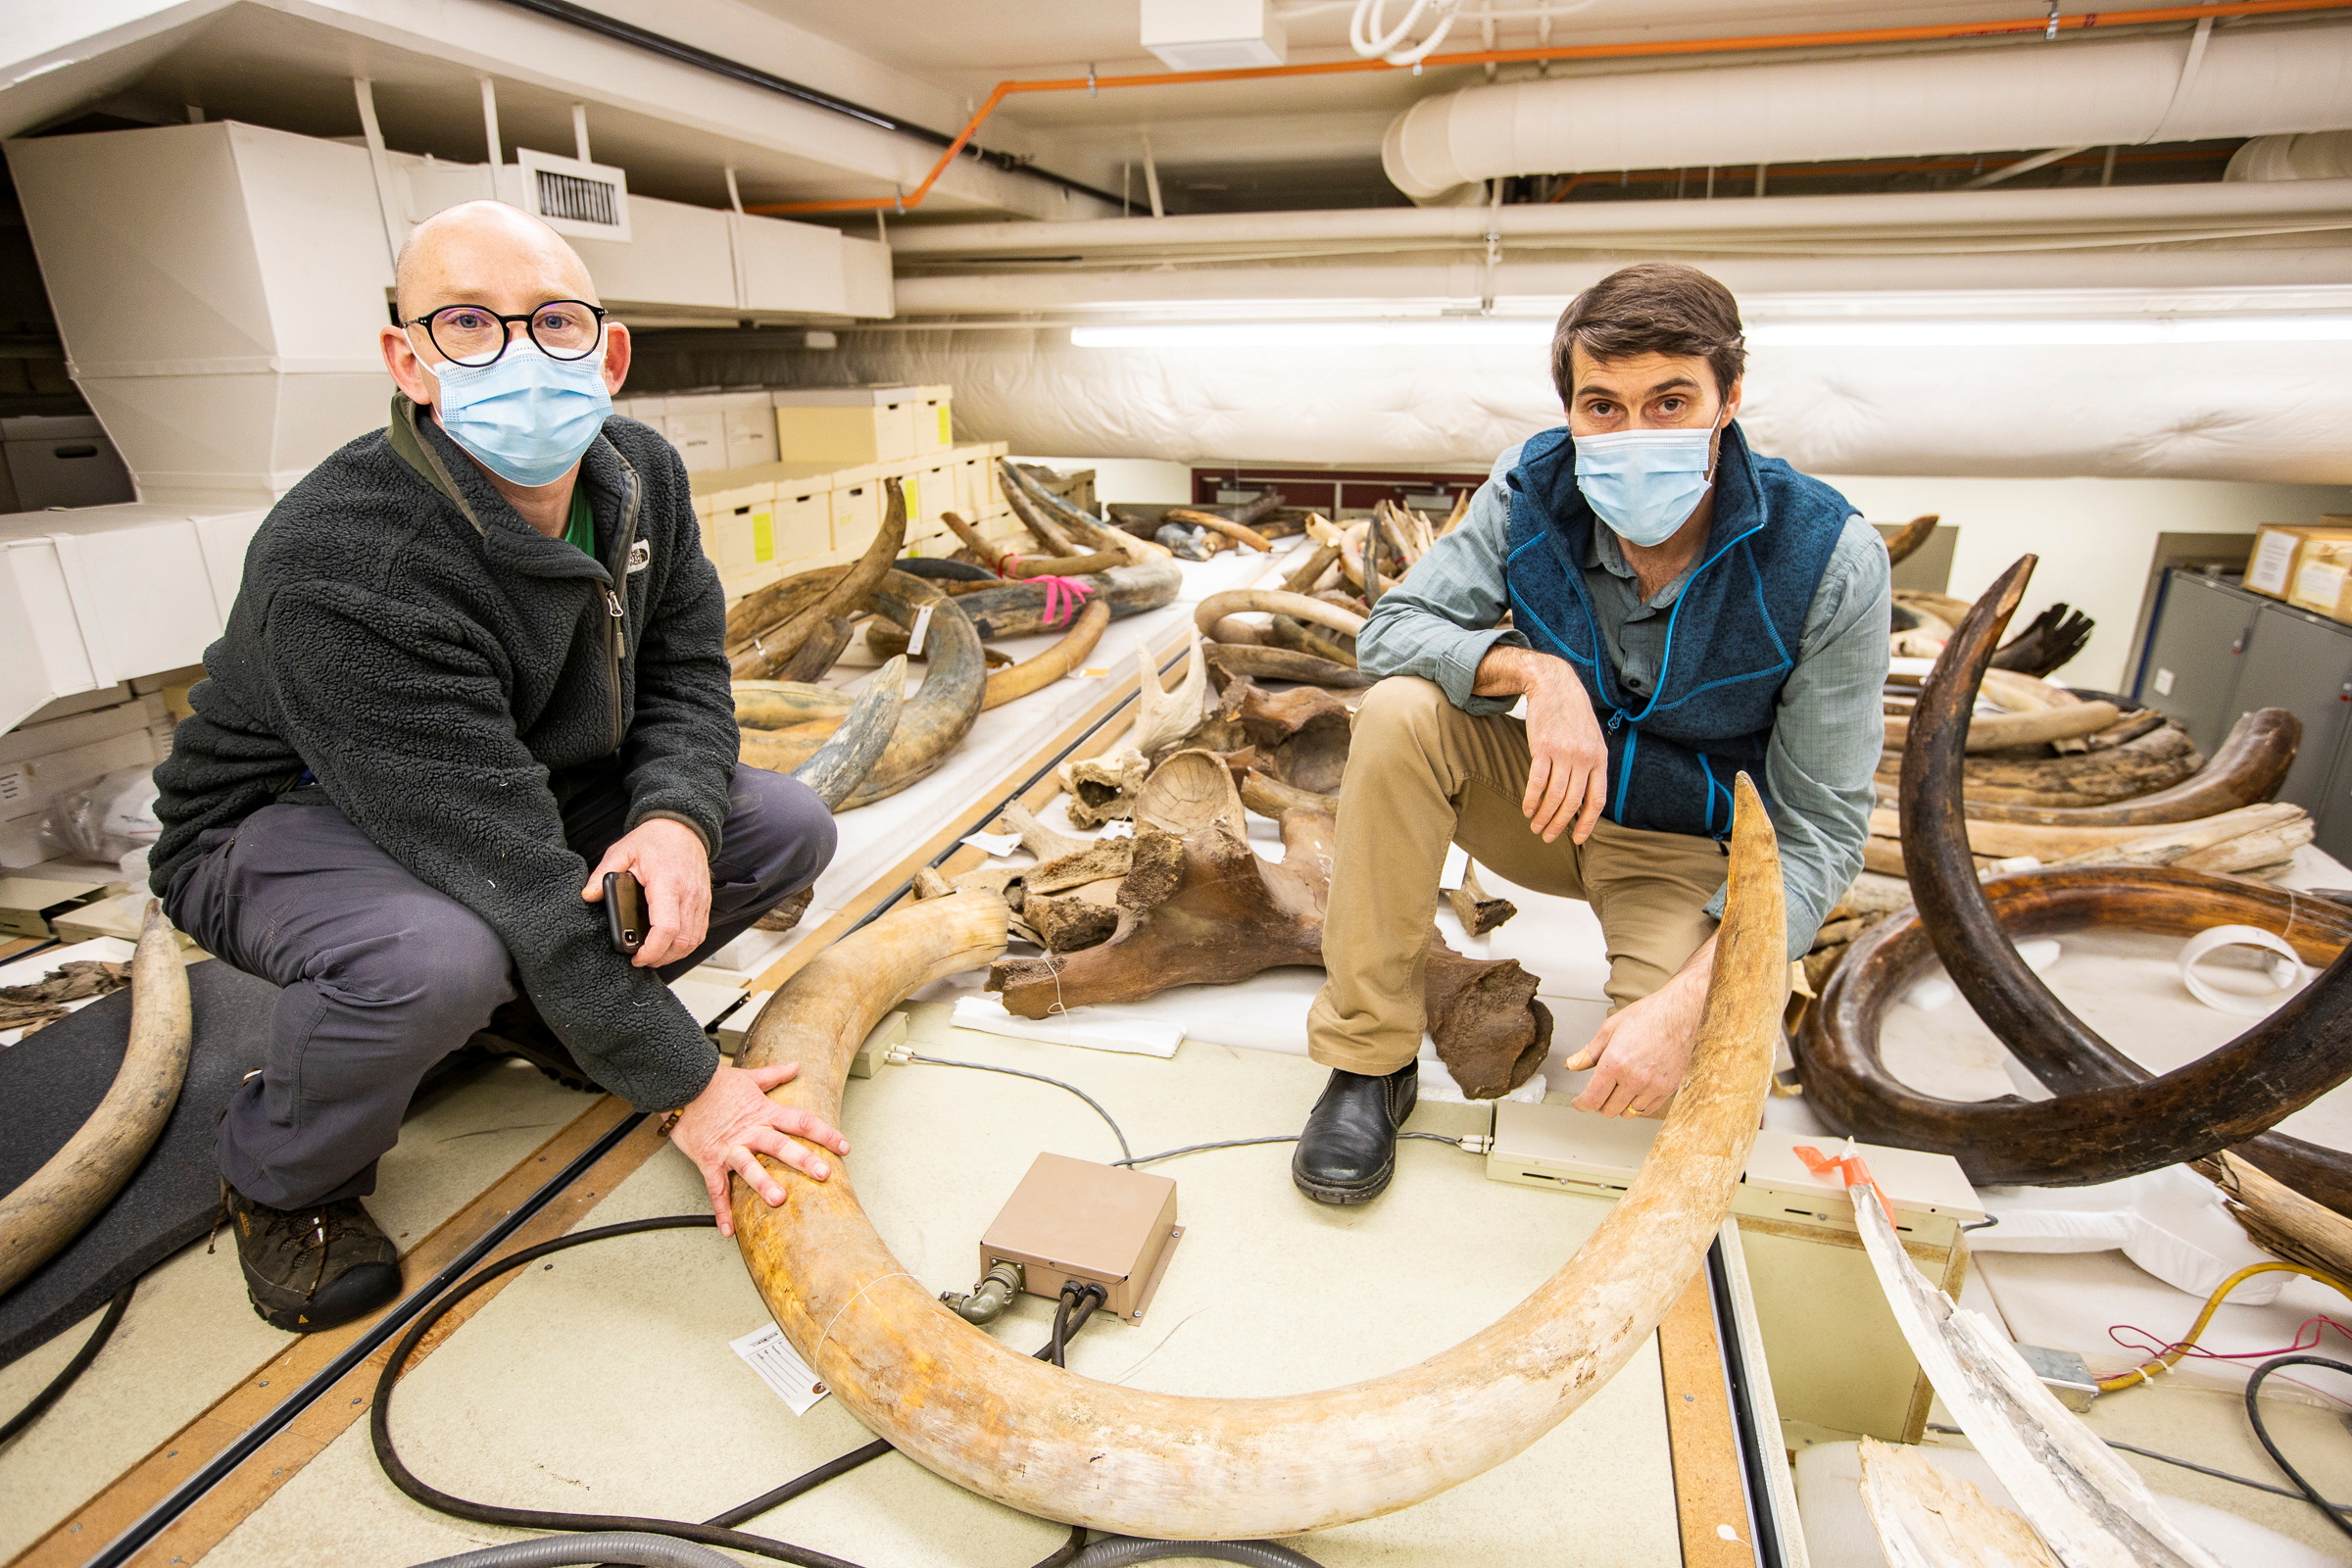 Mammoth tusk analyzed at the Alaska Stable Isotope Facility